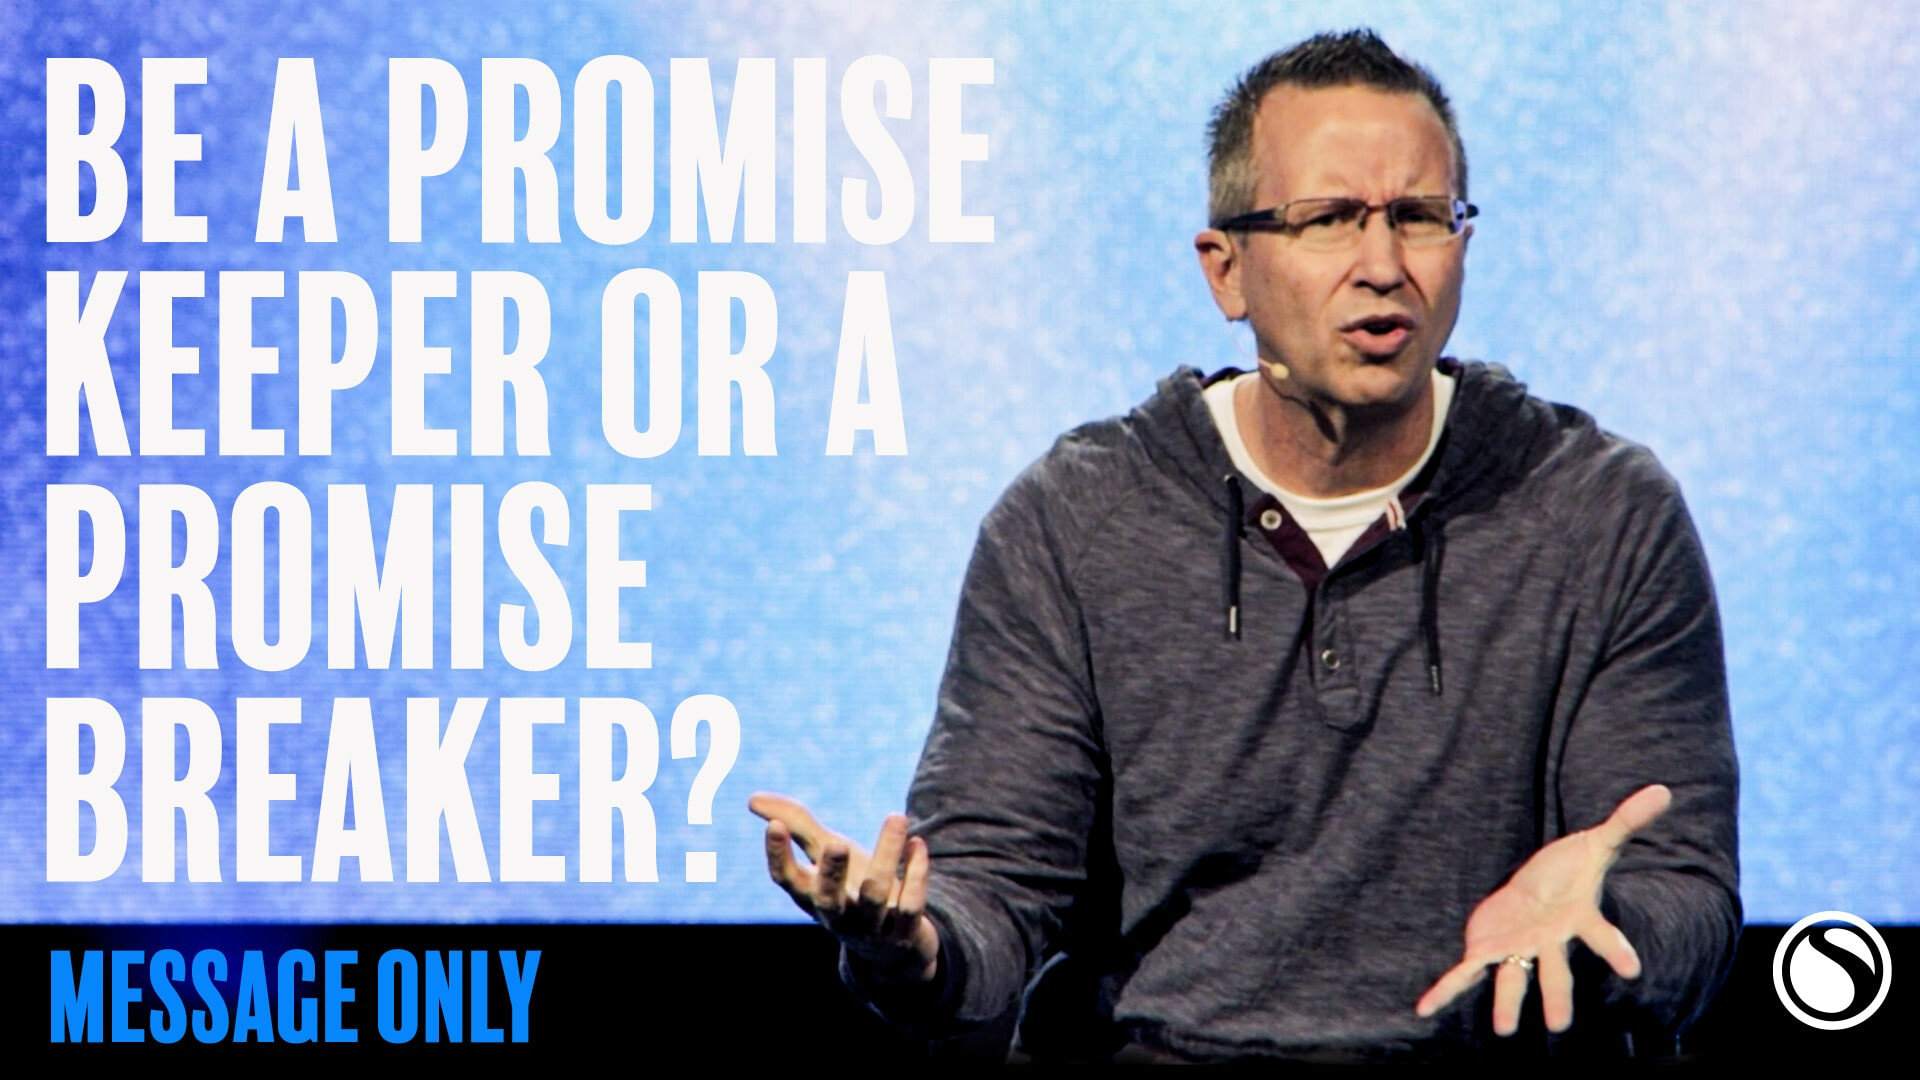 Watch Would You Rather - Be a Promise Keeper or Promise Breaker?